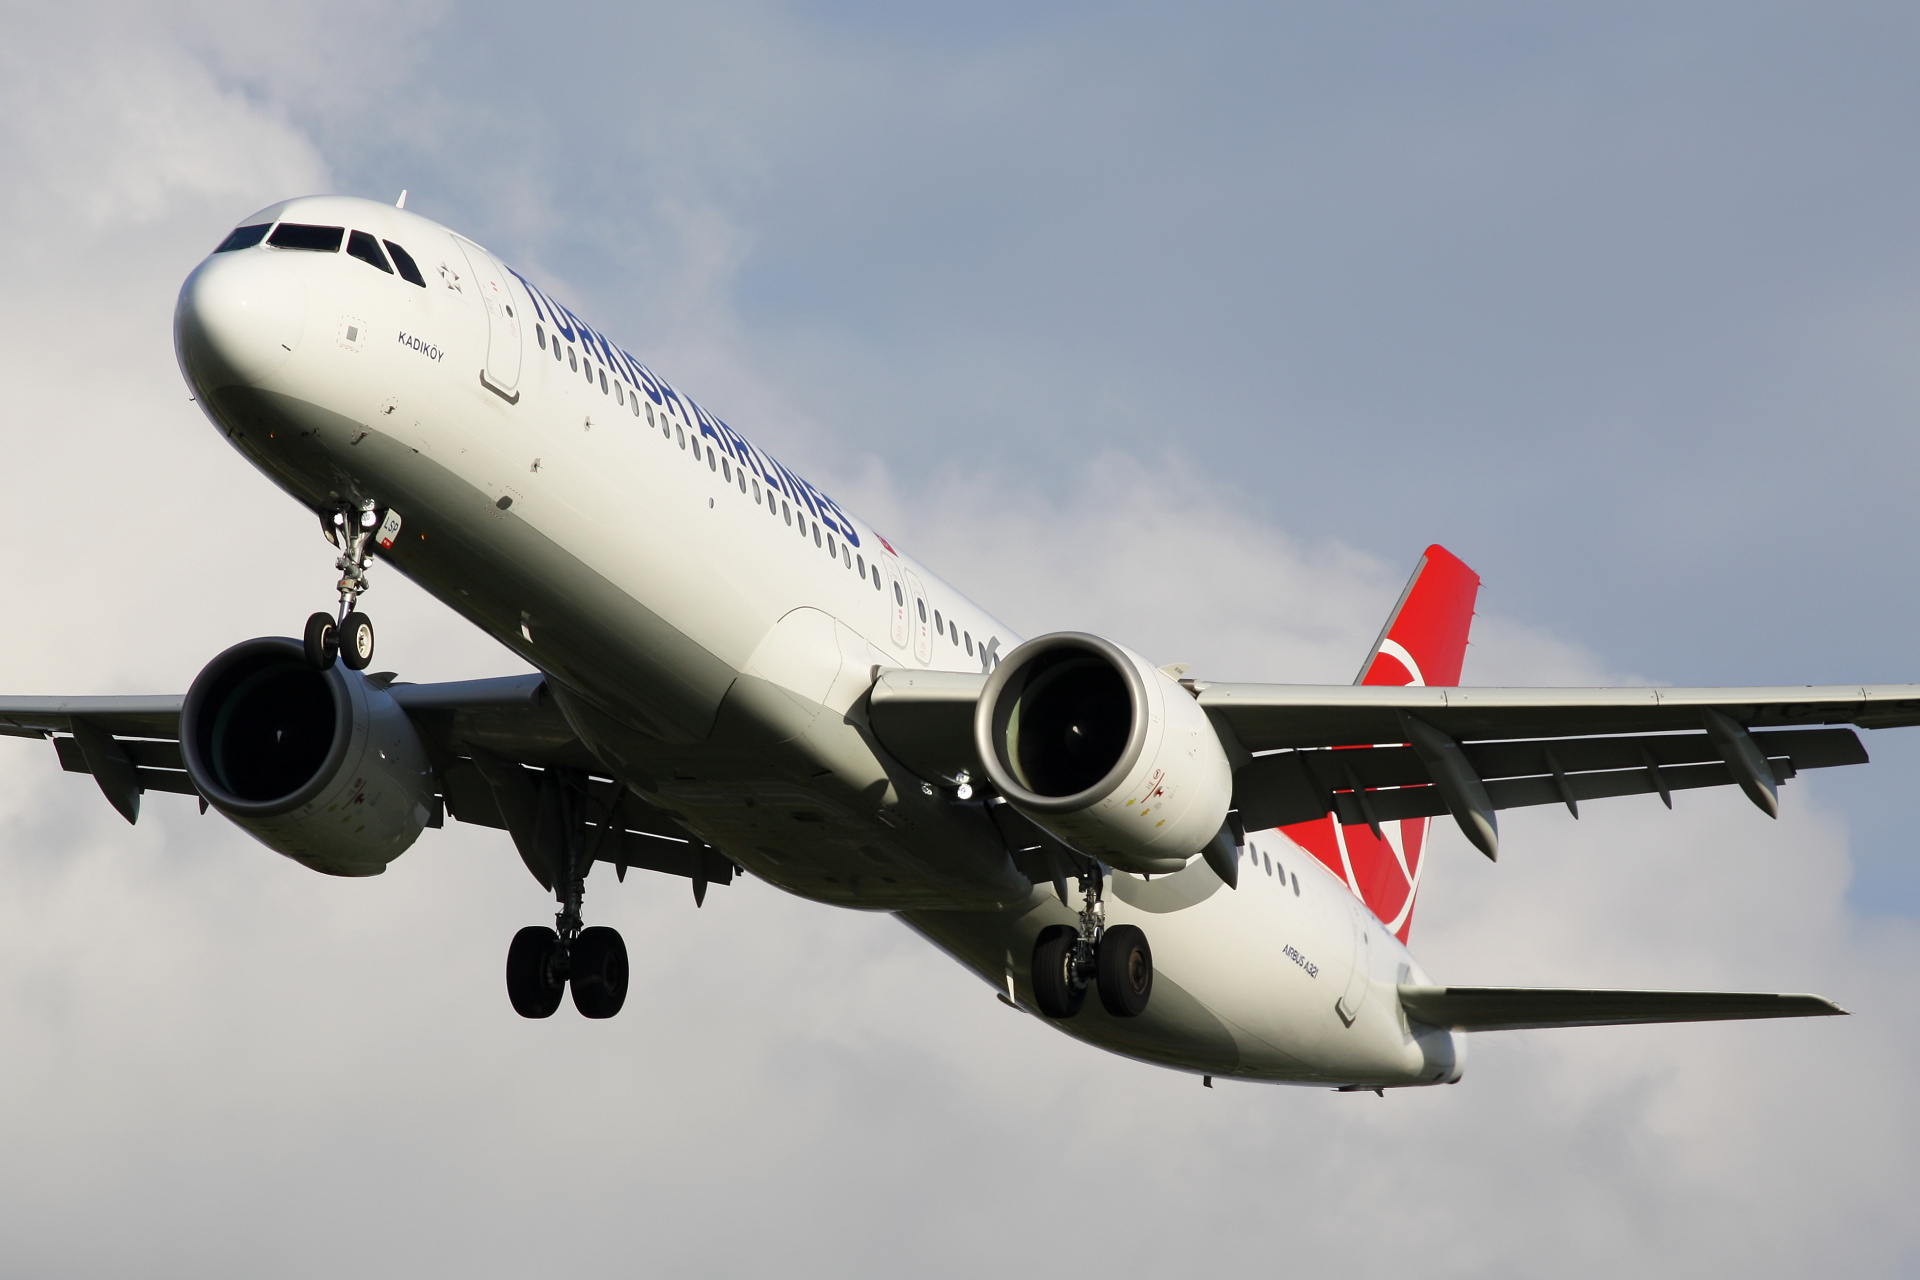 TC-LSP (Aircraft » EPWA Spotting » Airbus A321neo » THY Turkish Airlines)